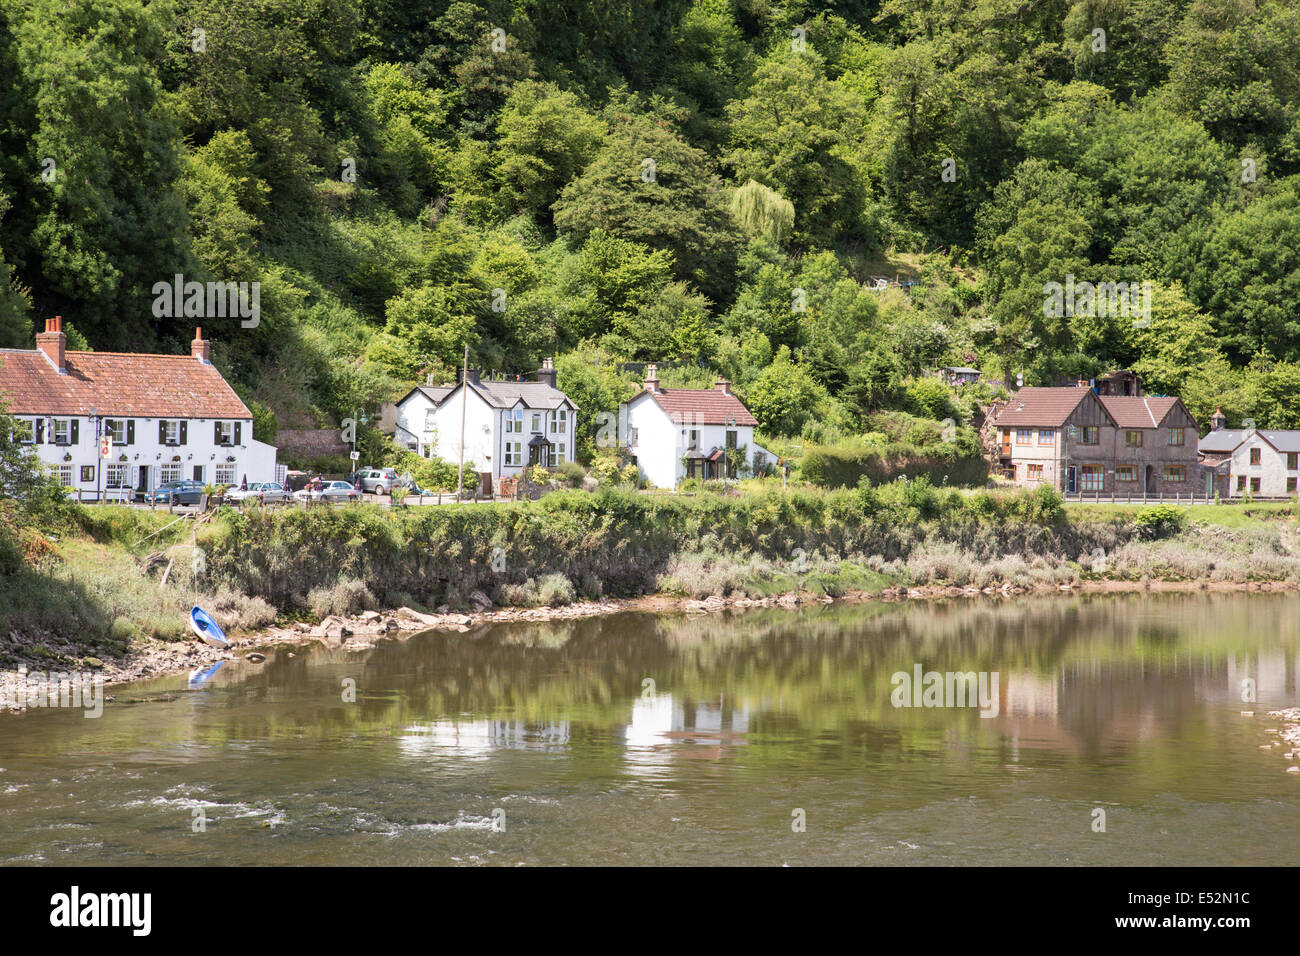 Cottages line the River Wye near Tintern Abbey (Abaty Tyndyrn) in the Wye Valley, Monmouthshire,,Wales, UK Stock Photo